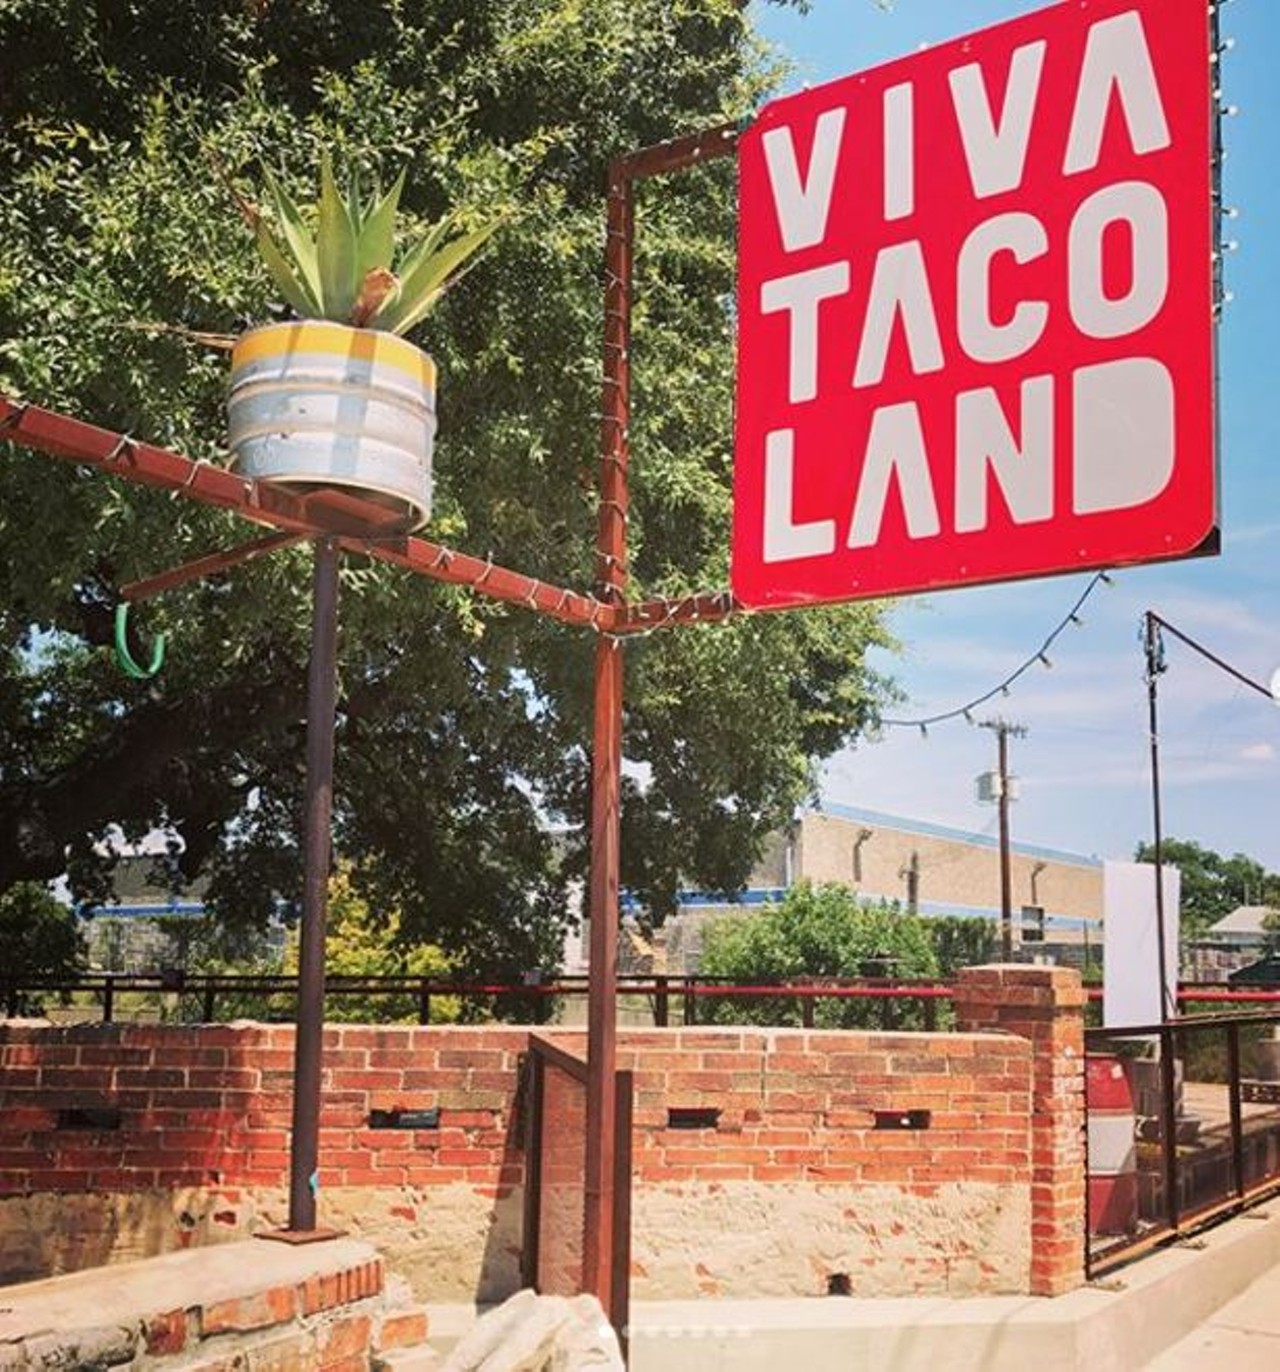 Viva Tacoland
103 W Grayson St., (210) 368-2443
Tacos, drinks, Instagram-post worthy murals: Viva Tacoland has everything you could ask for and more. 
Photo via Instagram, mczepolap